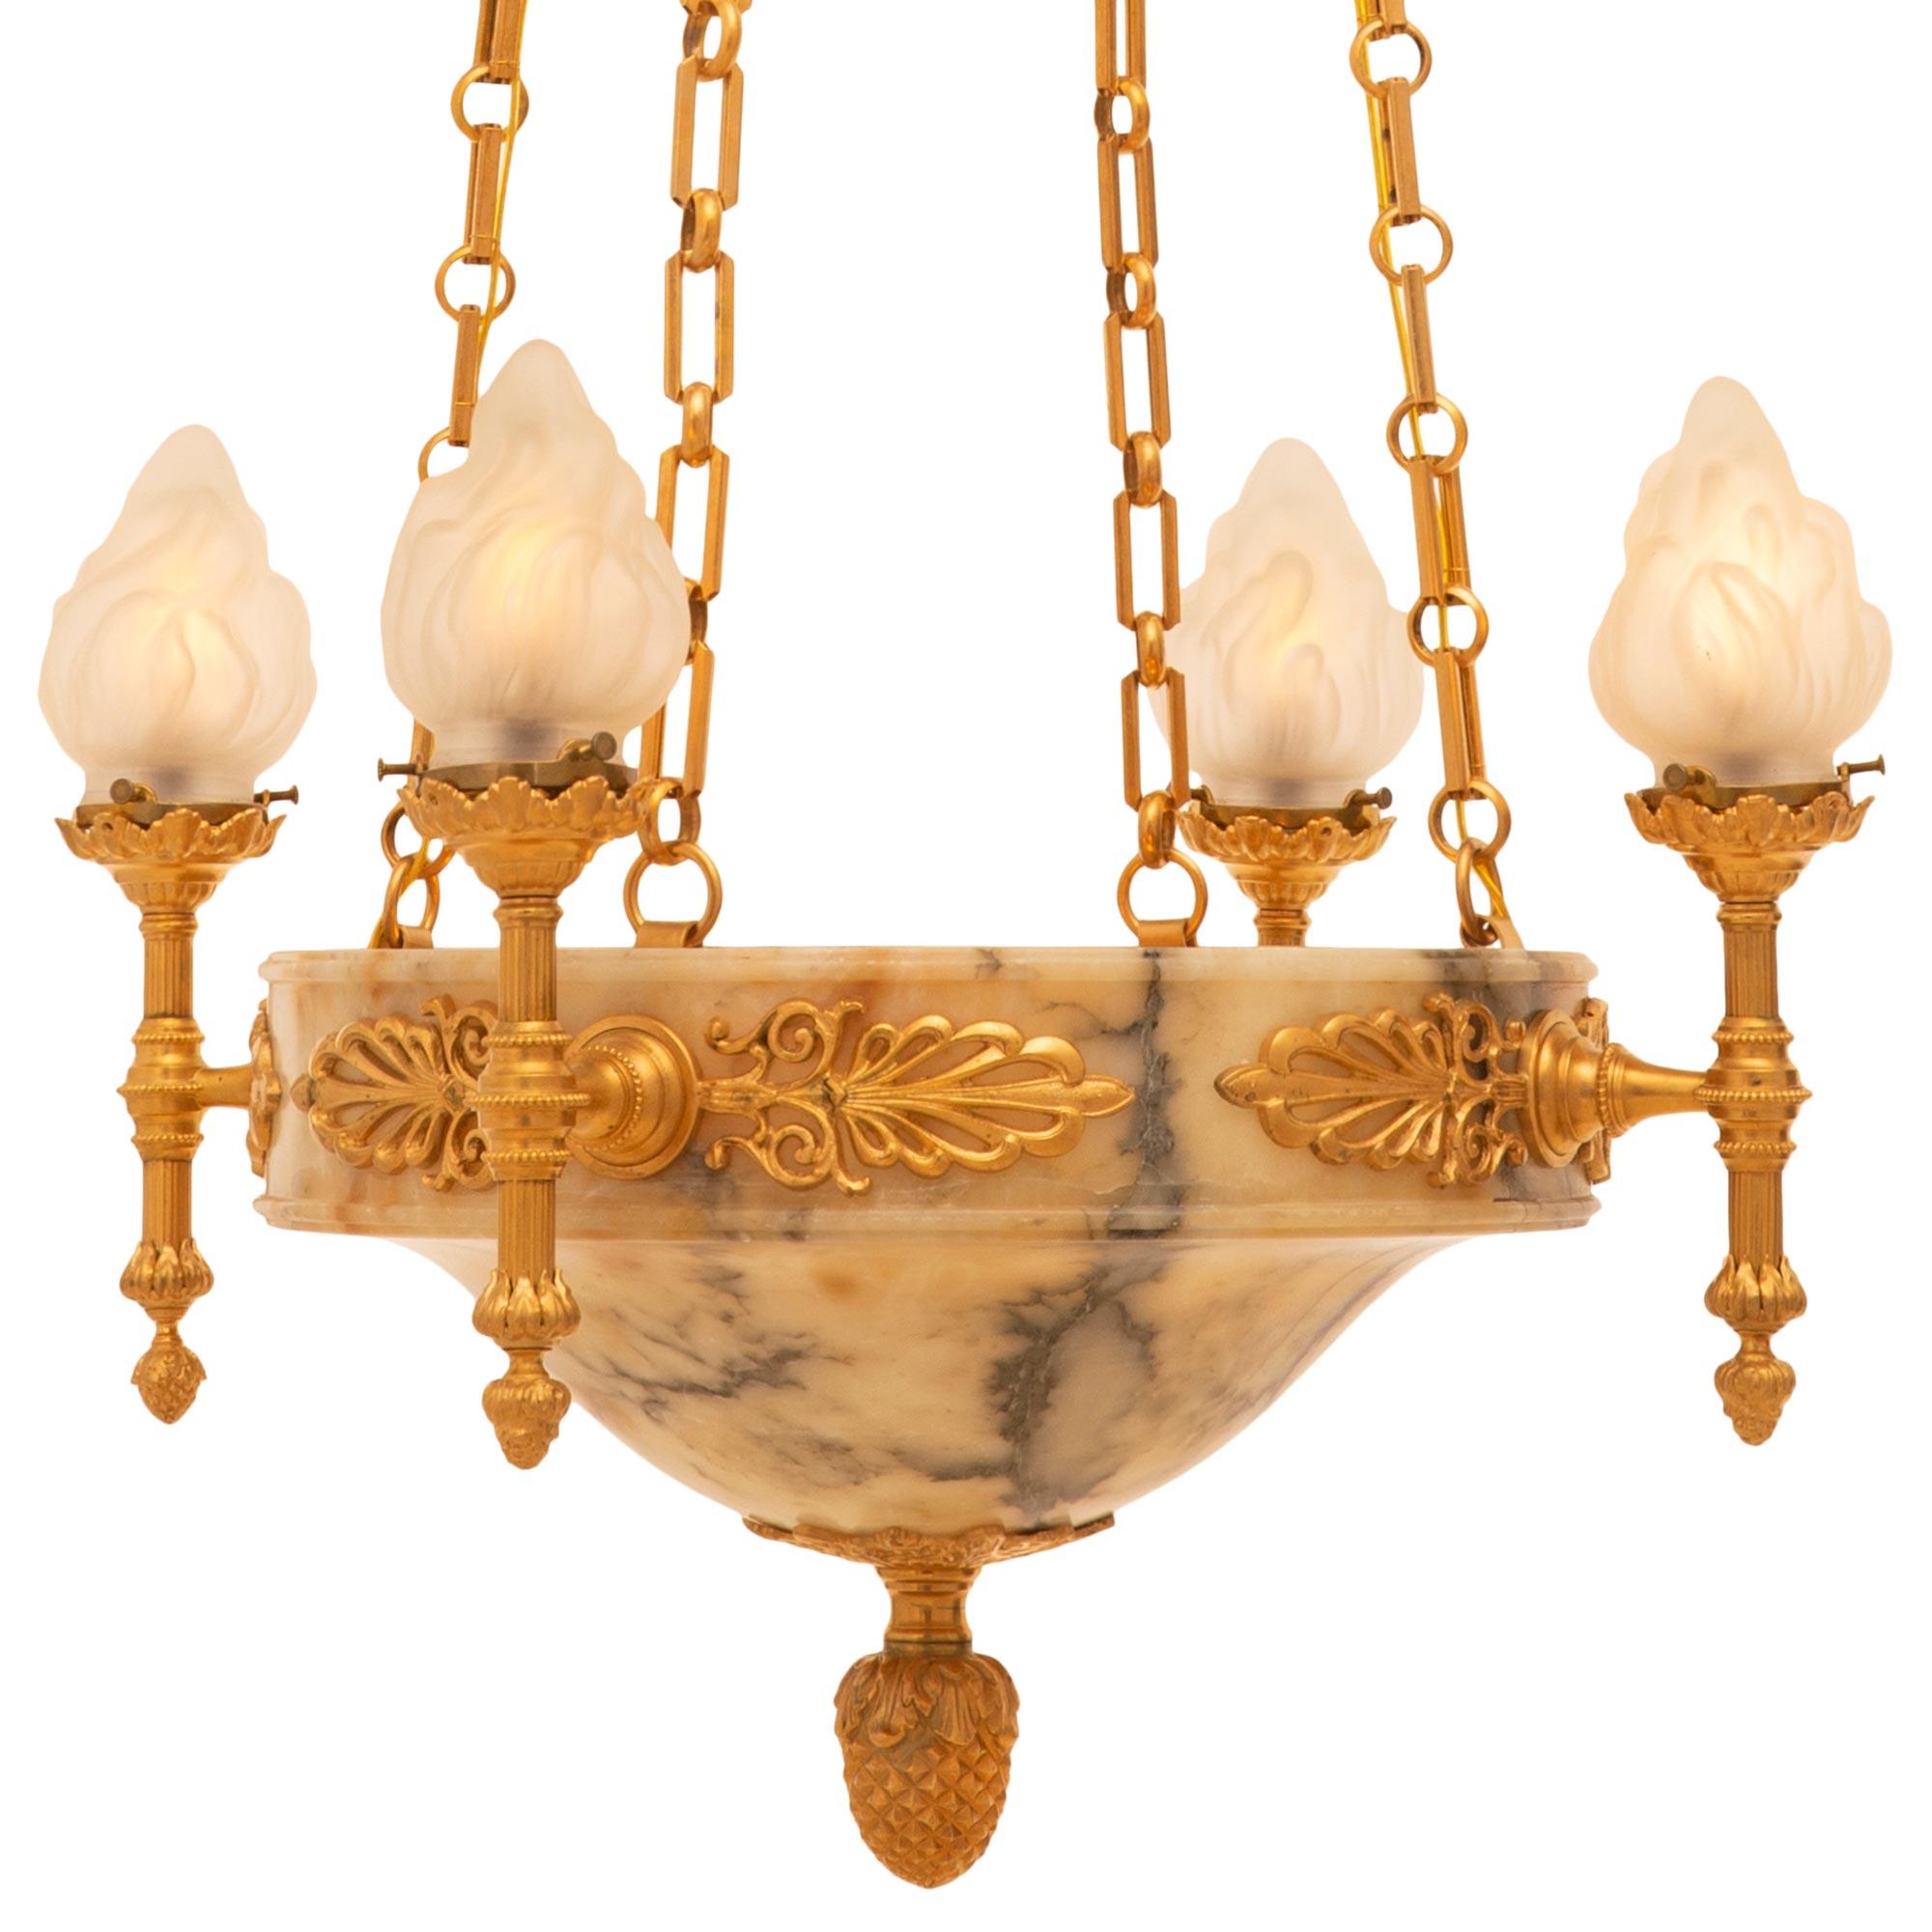 A most impressive French 19th century neo-classical st. alabaster and ormolu eight light, four arm chandelier. The chandelier is centered by an elegant ormolu acorn finial with a foliate back plate set at the striking central alabaster bowl which